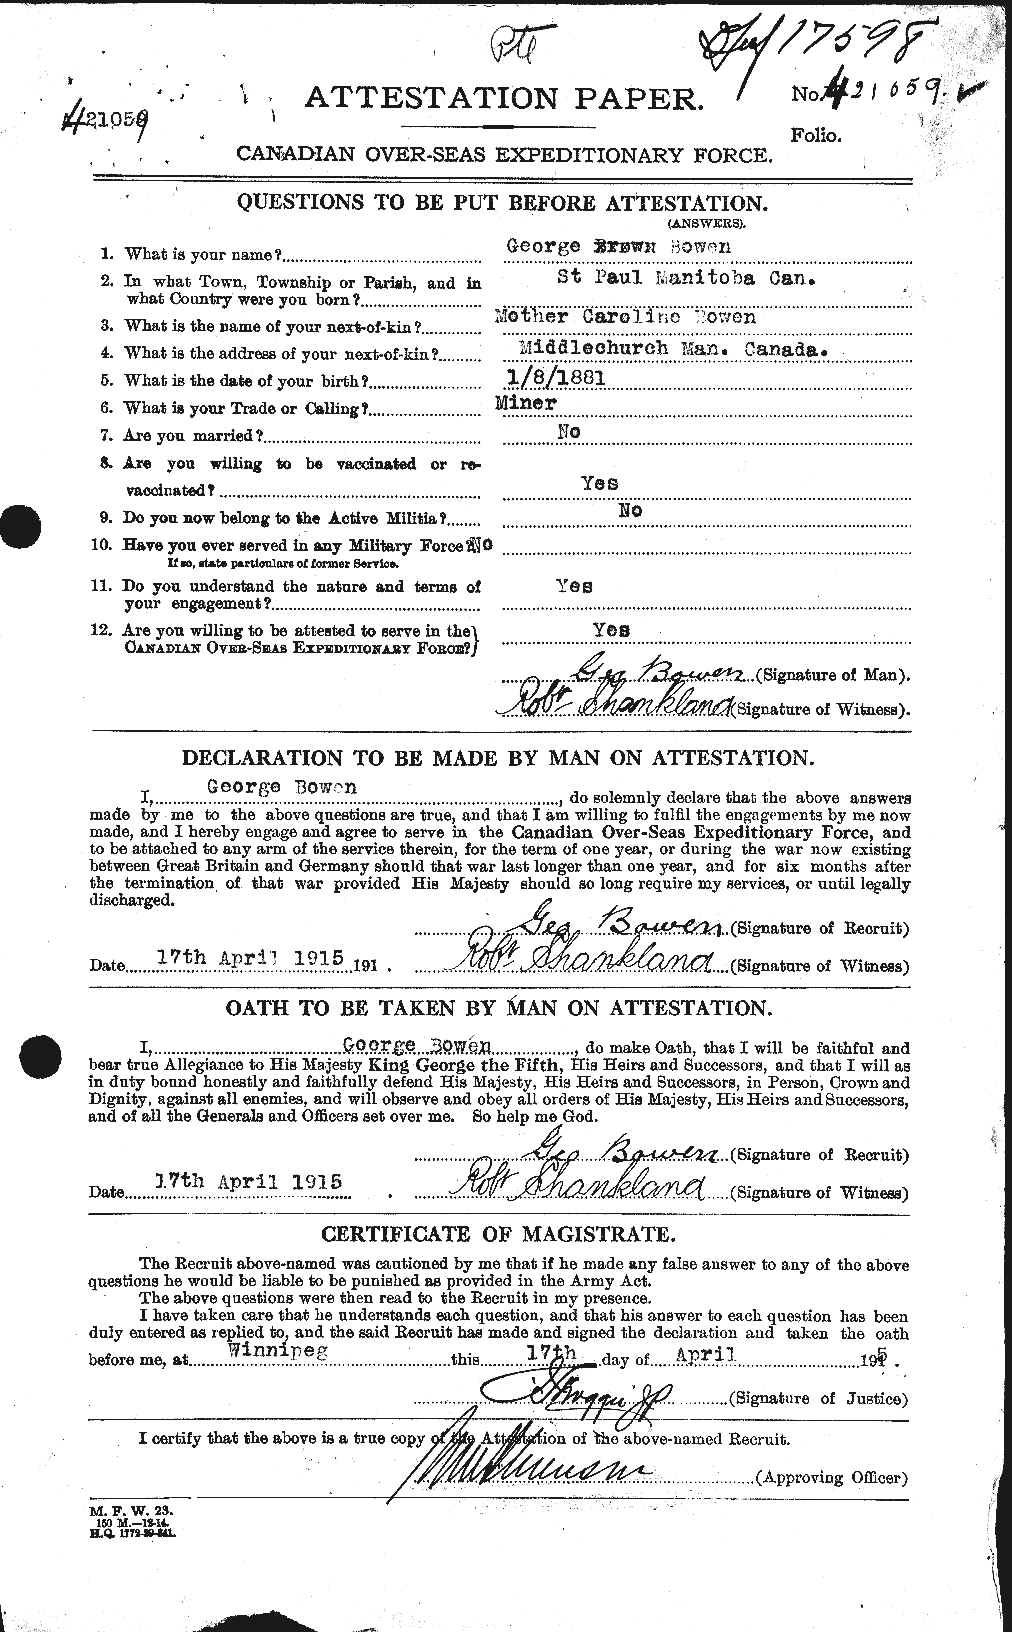 Personnel Records of the First World War - CEF 255398a